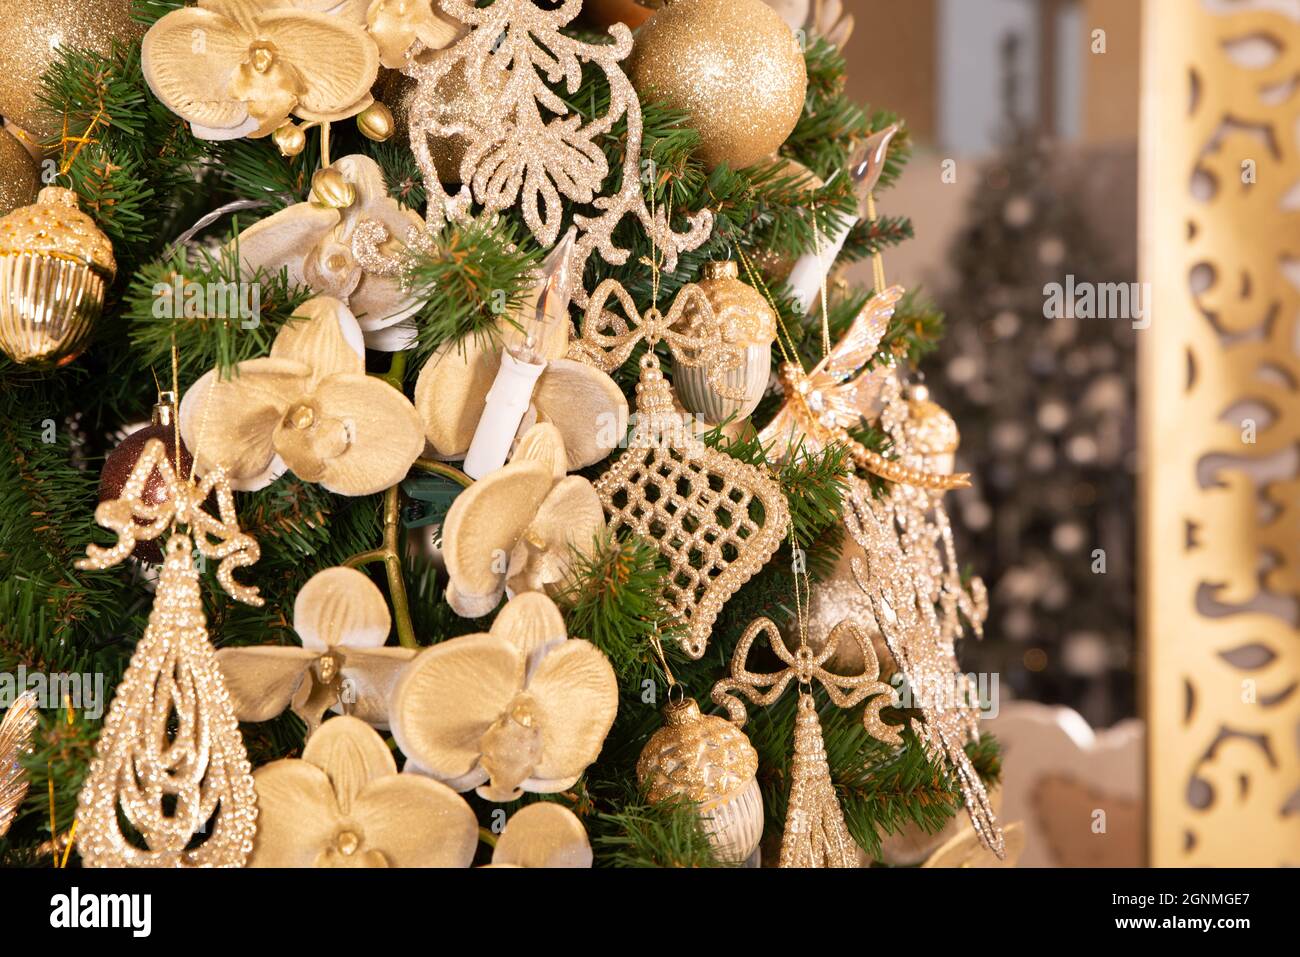 christmas tree with gold decorations close-up Stock Photo